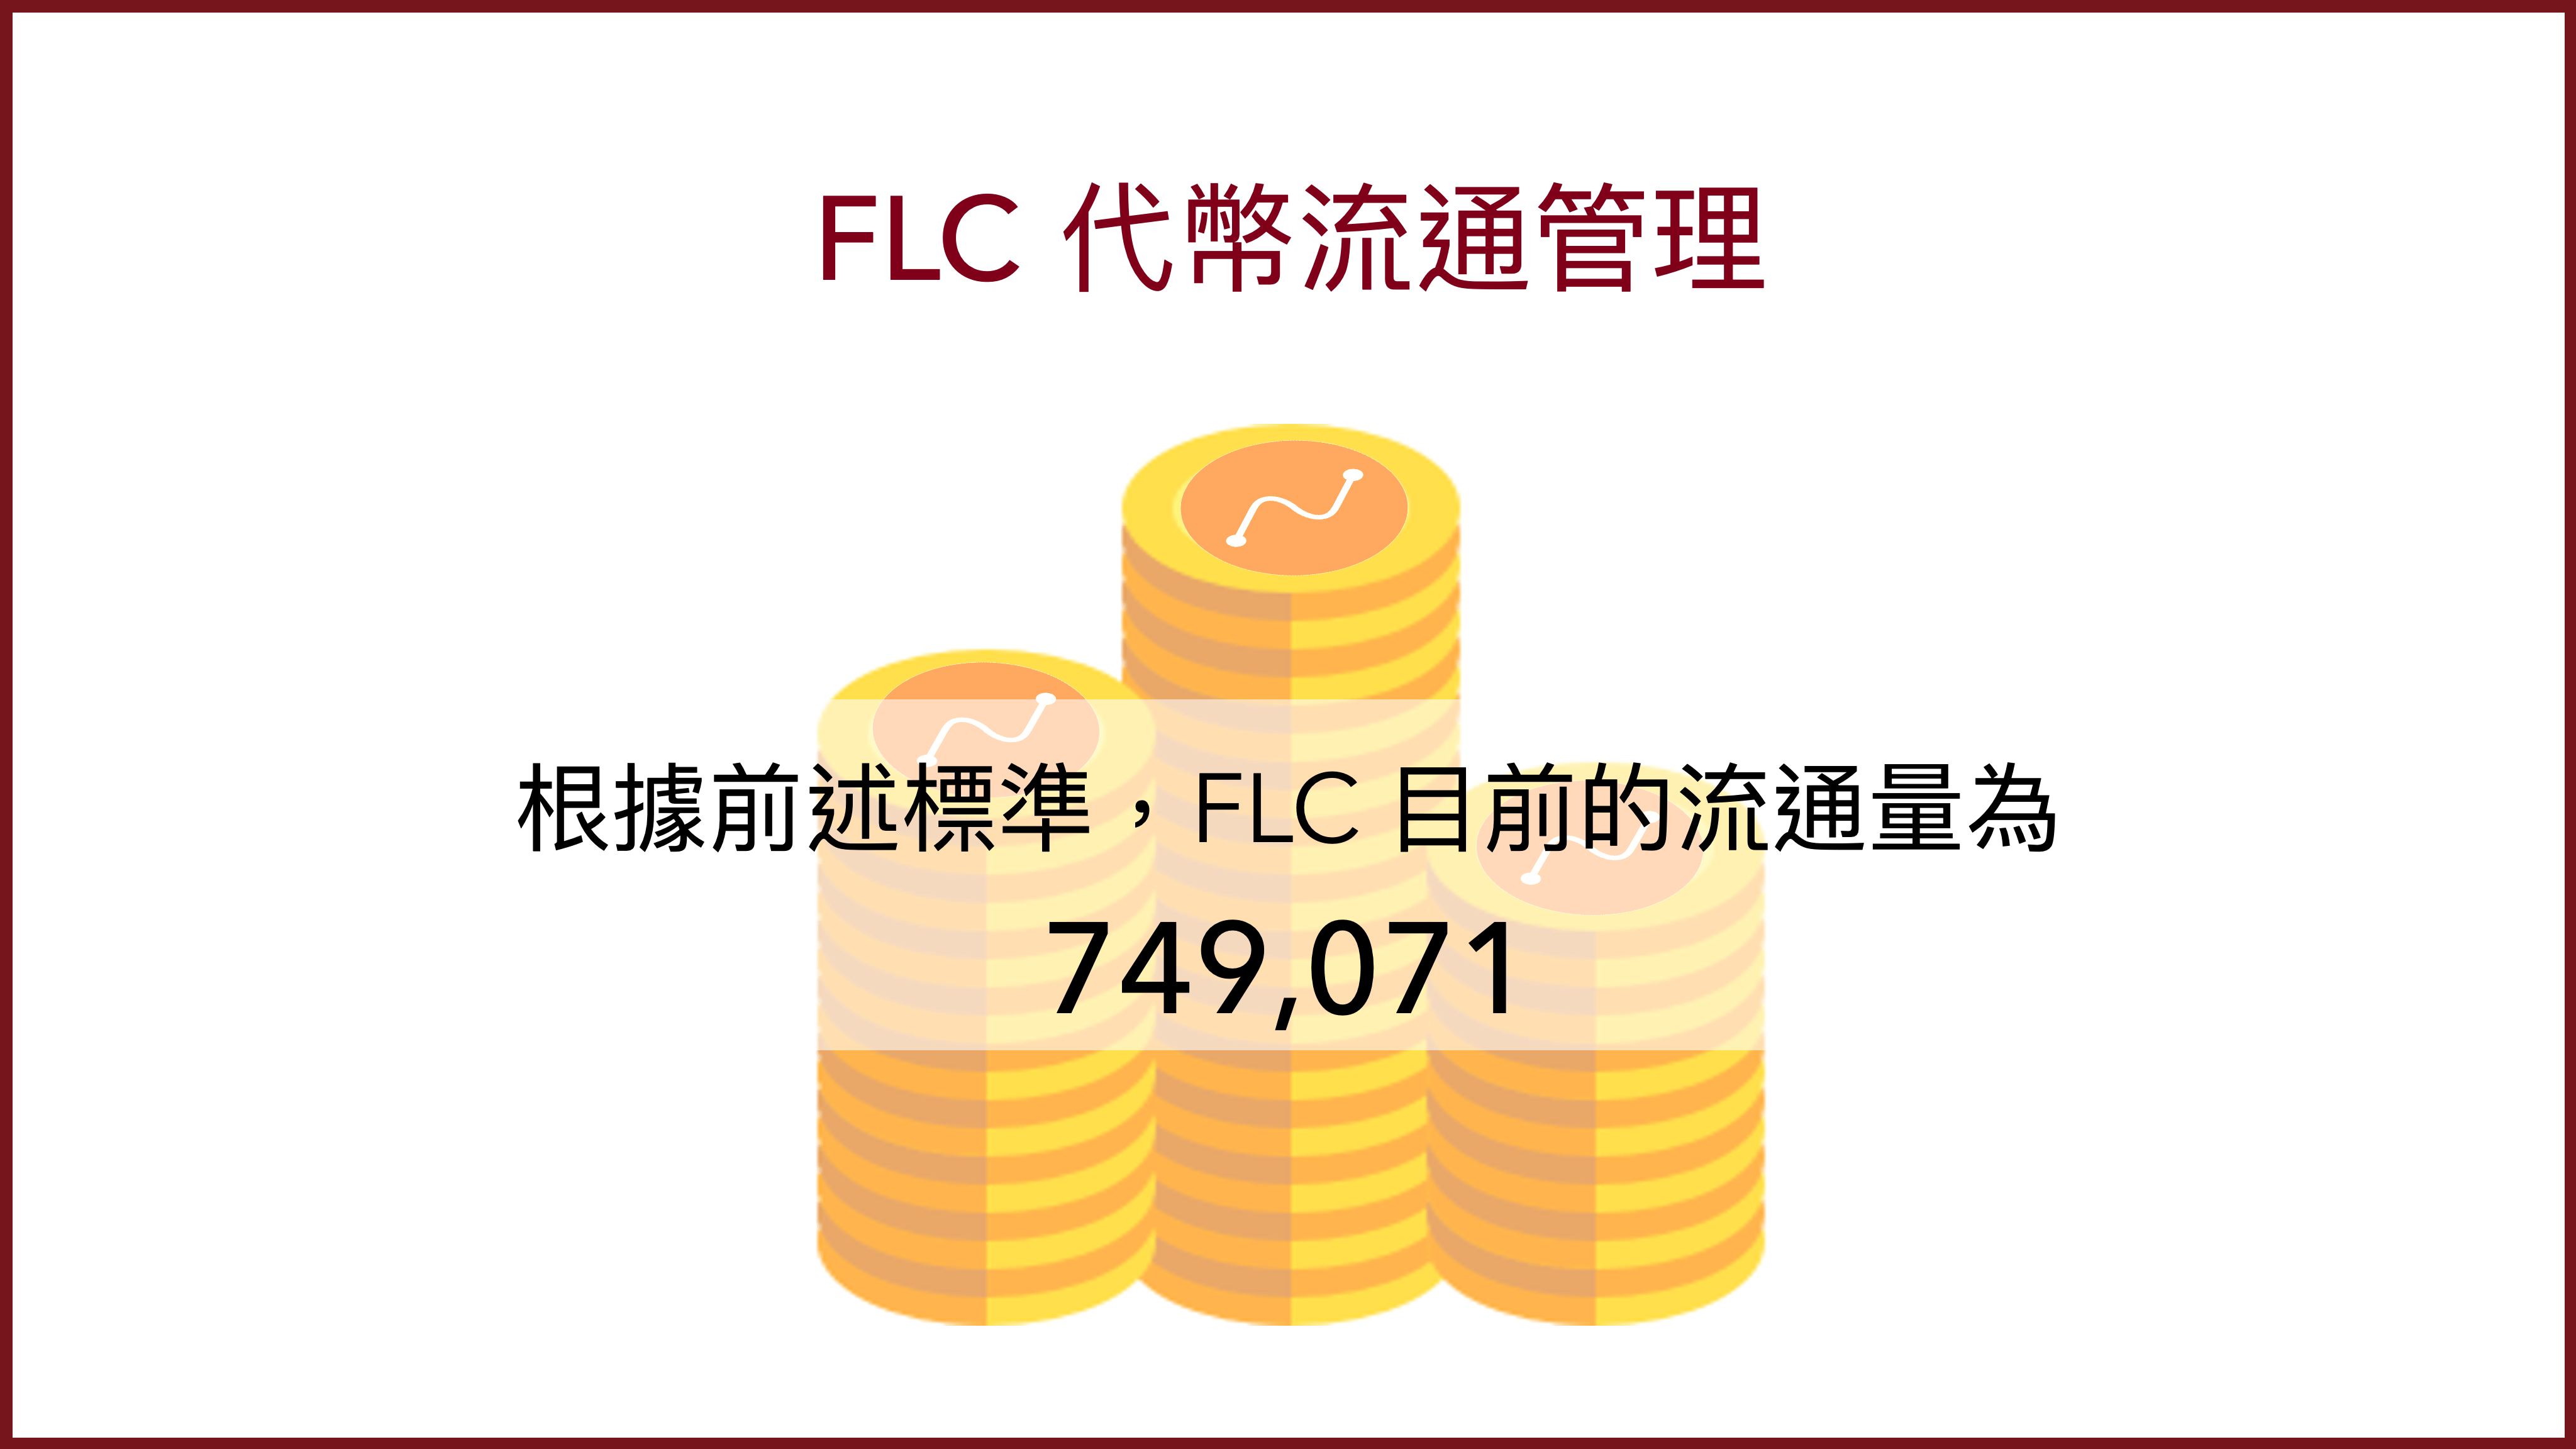 FLC policy